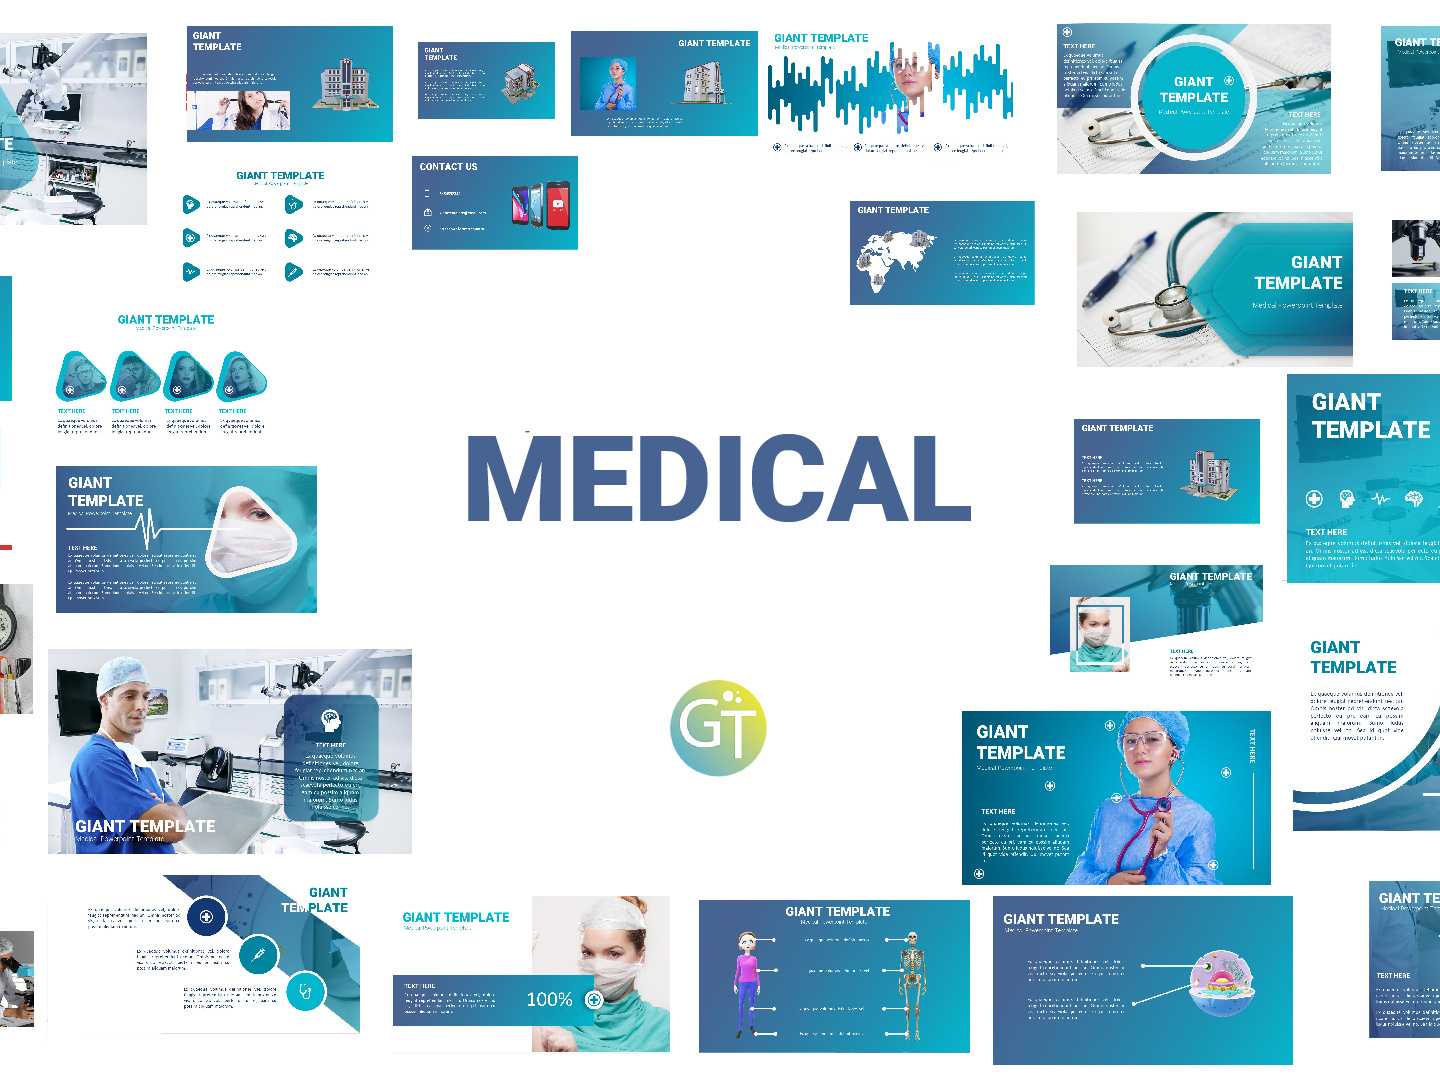 Medical Powerpoint Templates Free Downloadgiant Template For Free Powerpoint Presentation Templates Downloads